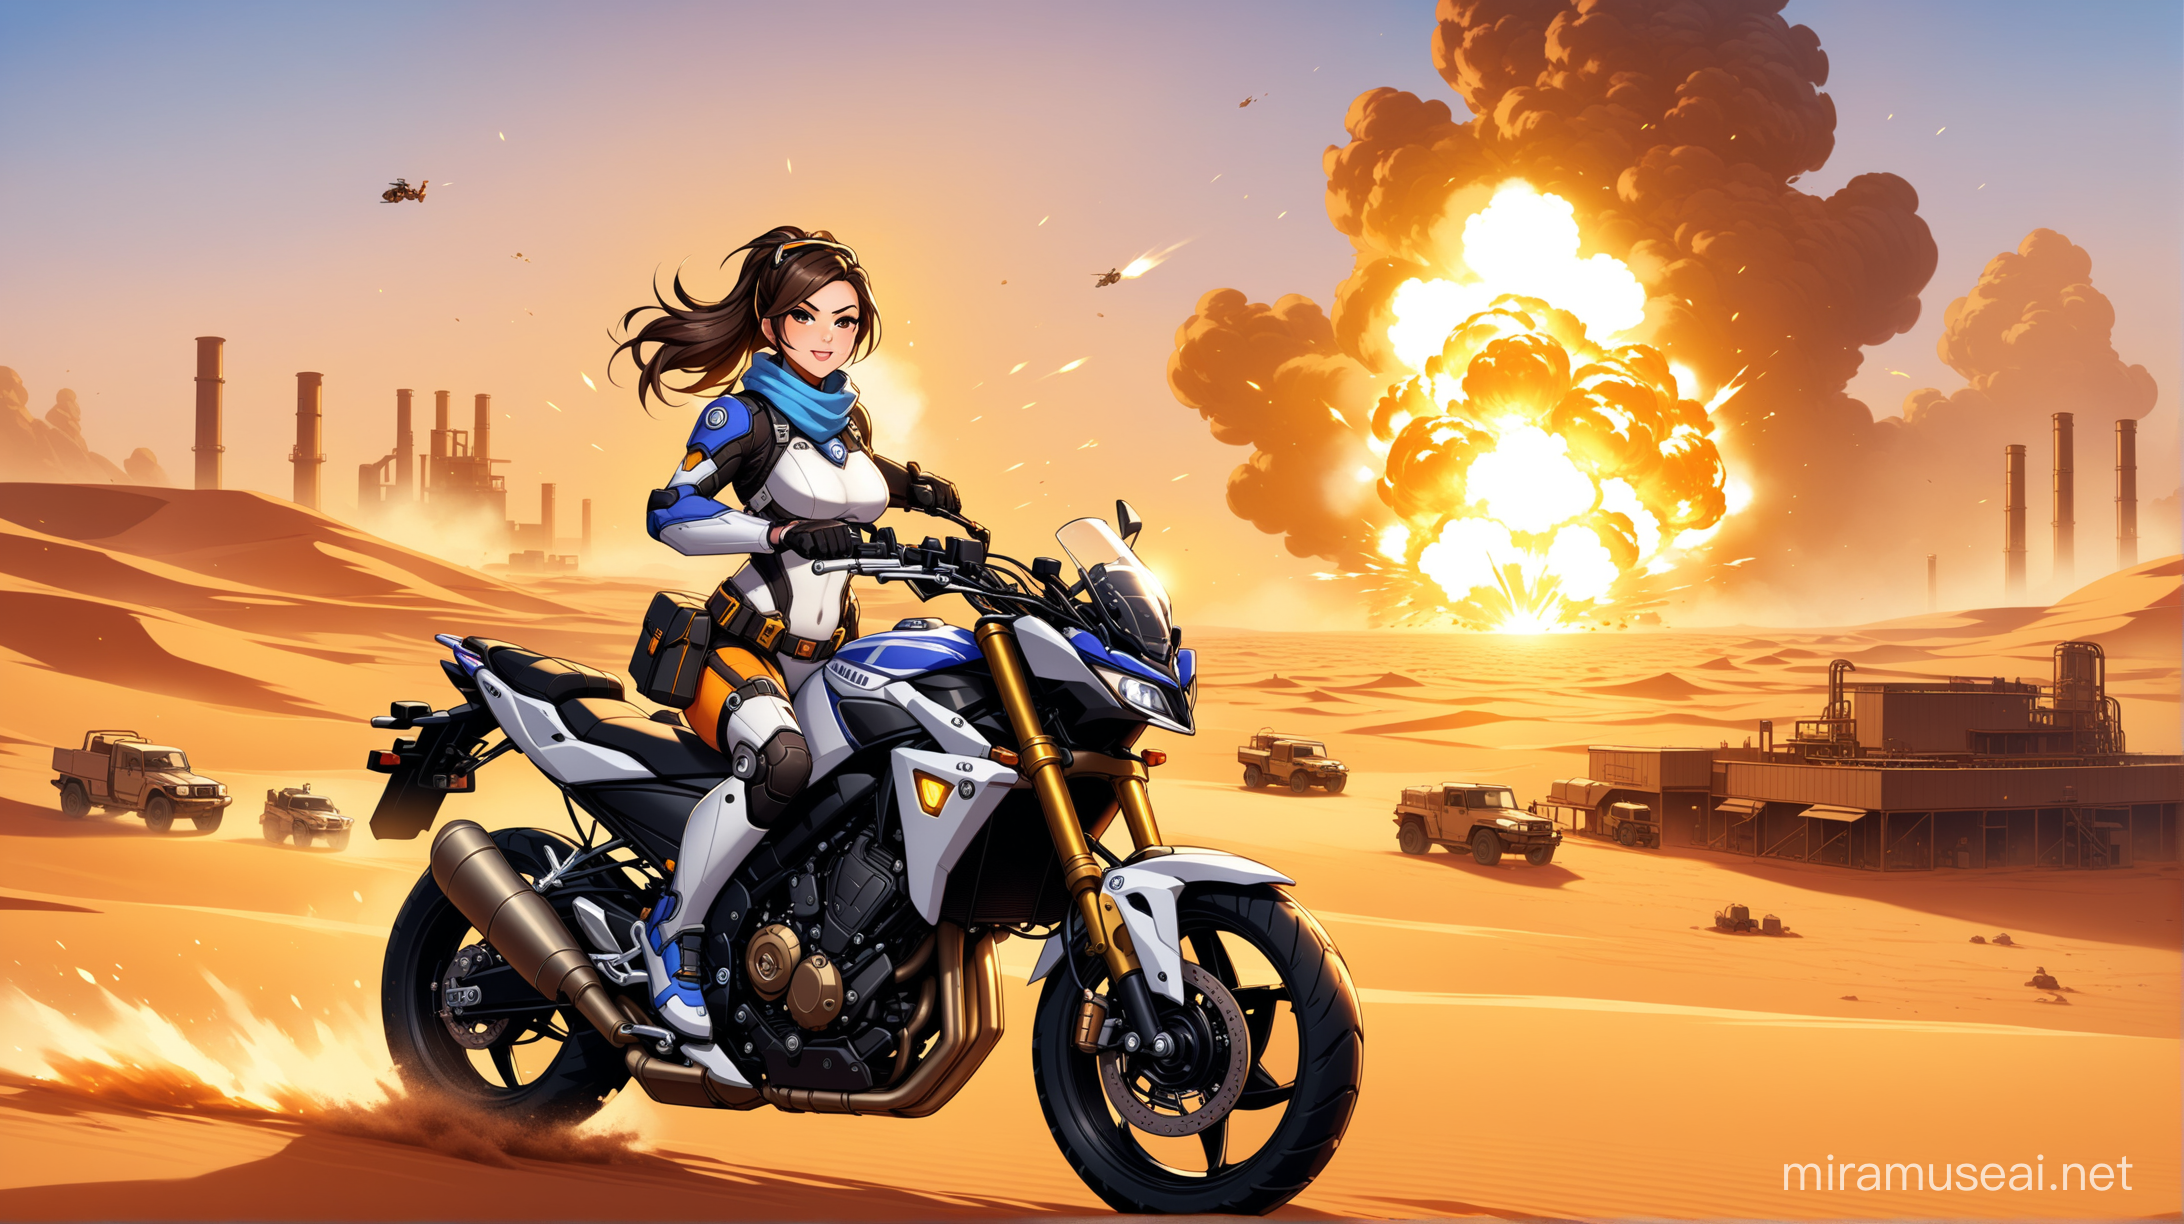 Overwatch Character Girl Riding Yamaha Motorcycle in Sahara Desert with Steel Factory Explosion